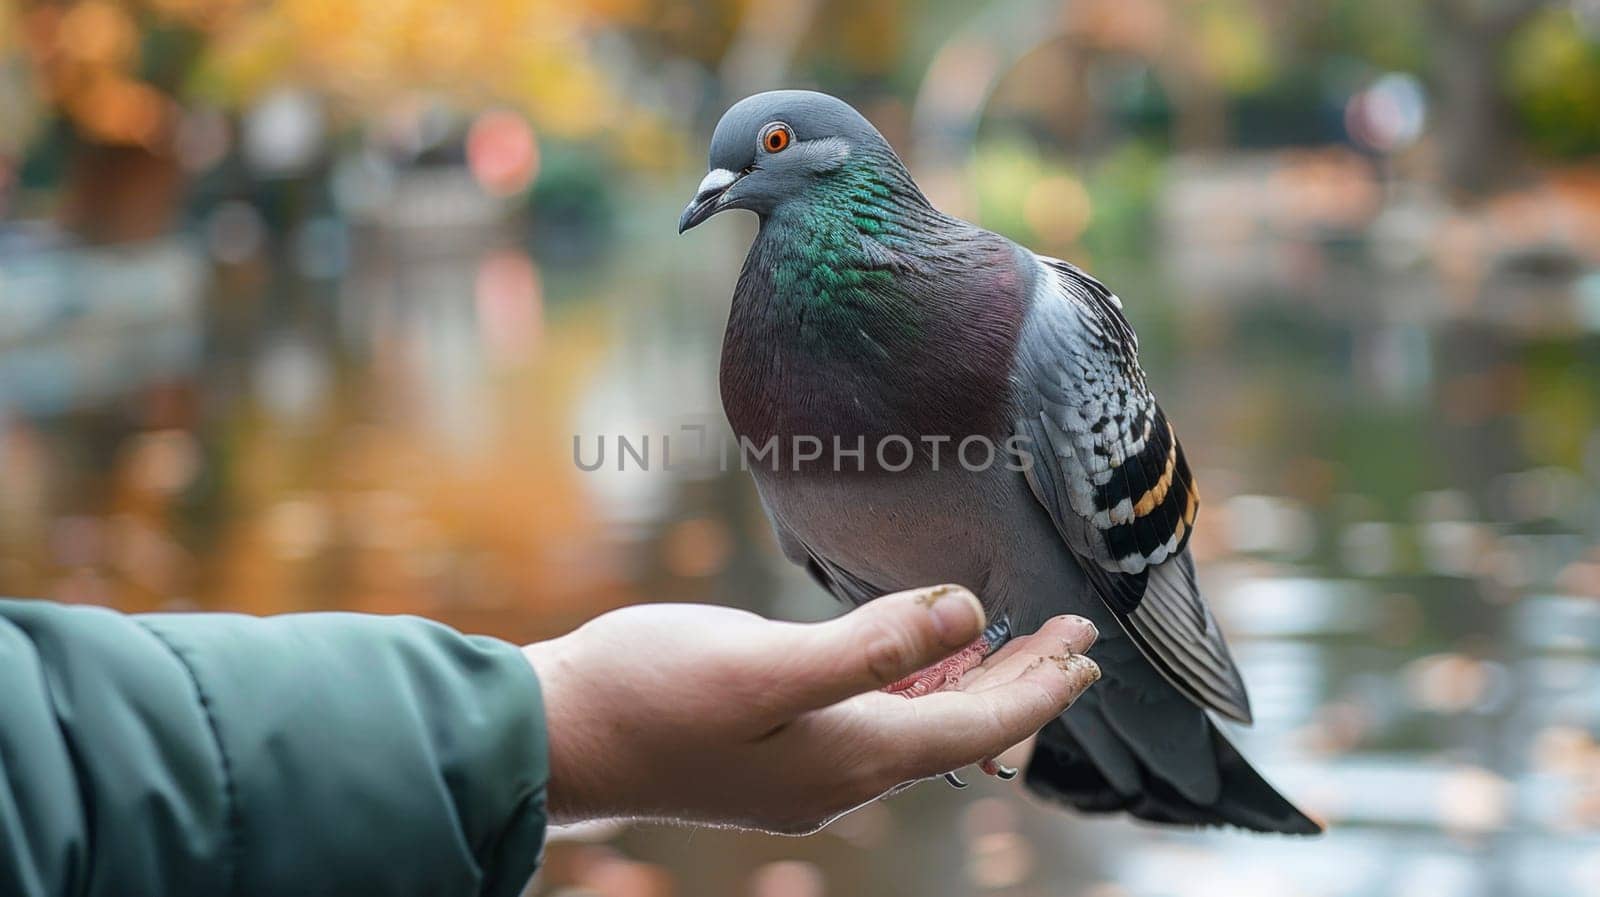 A person holding a bird in their hand by the water